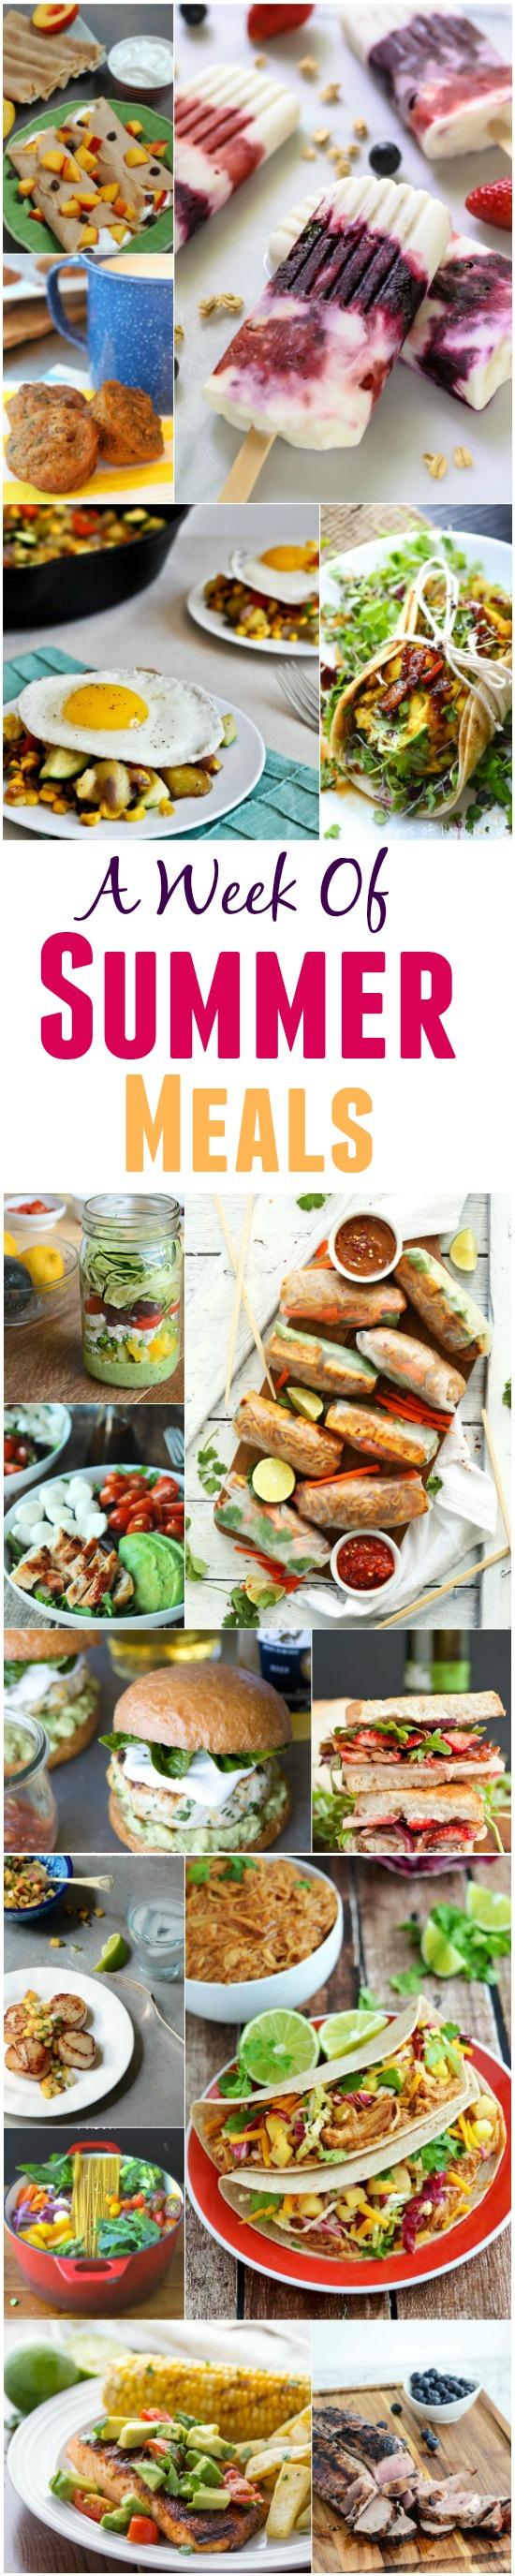 A Week of Summer Meal Ideas - breakfast, lunch, dinner, sides and salads!